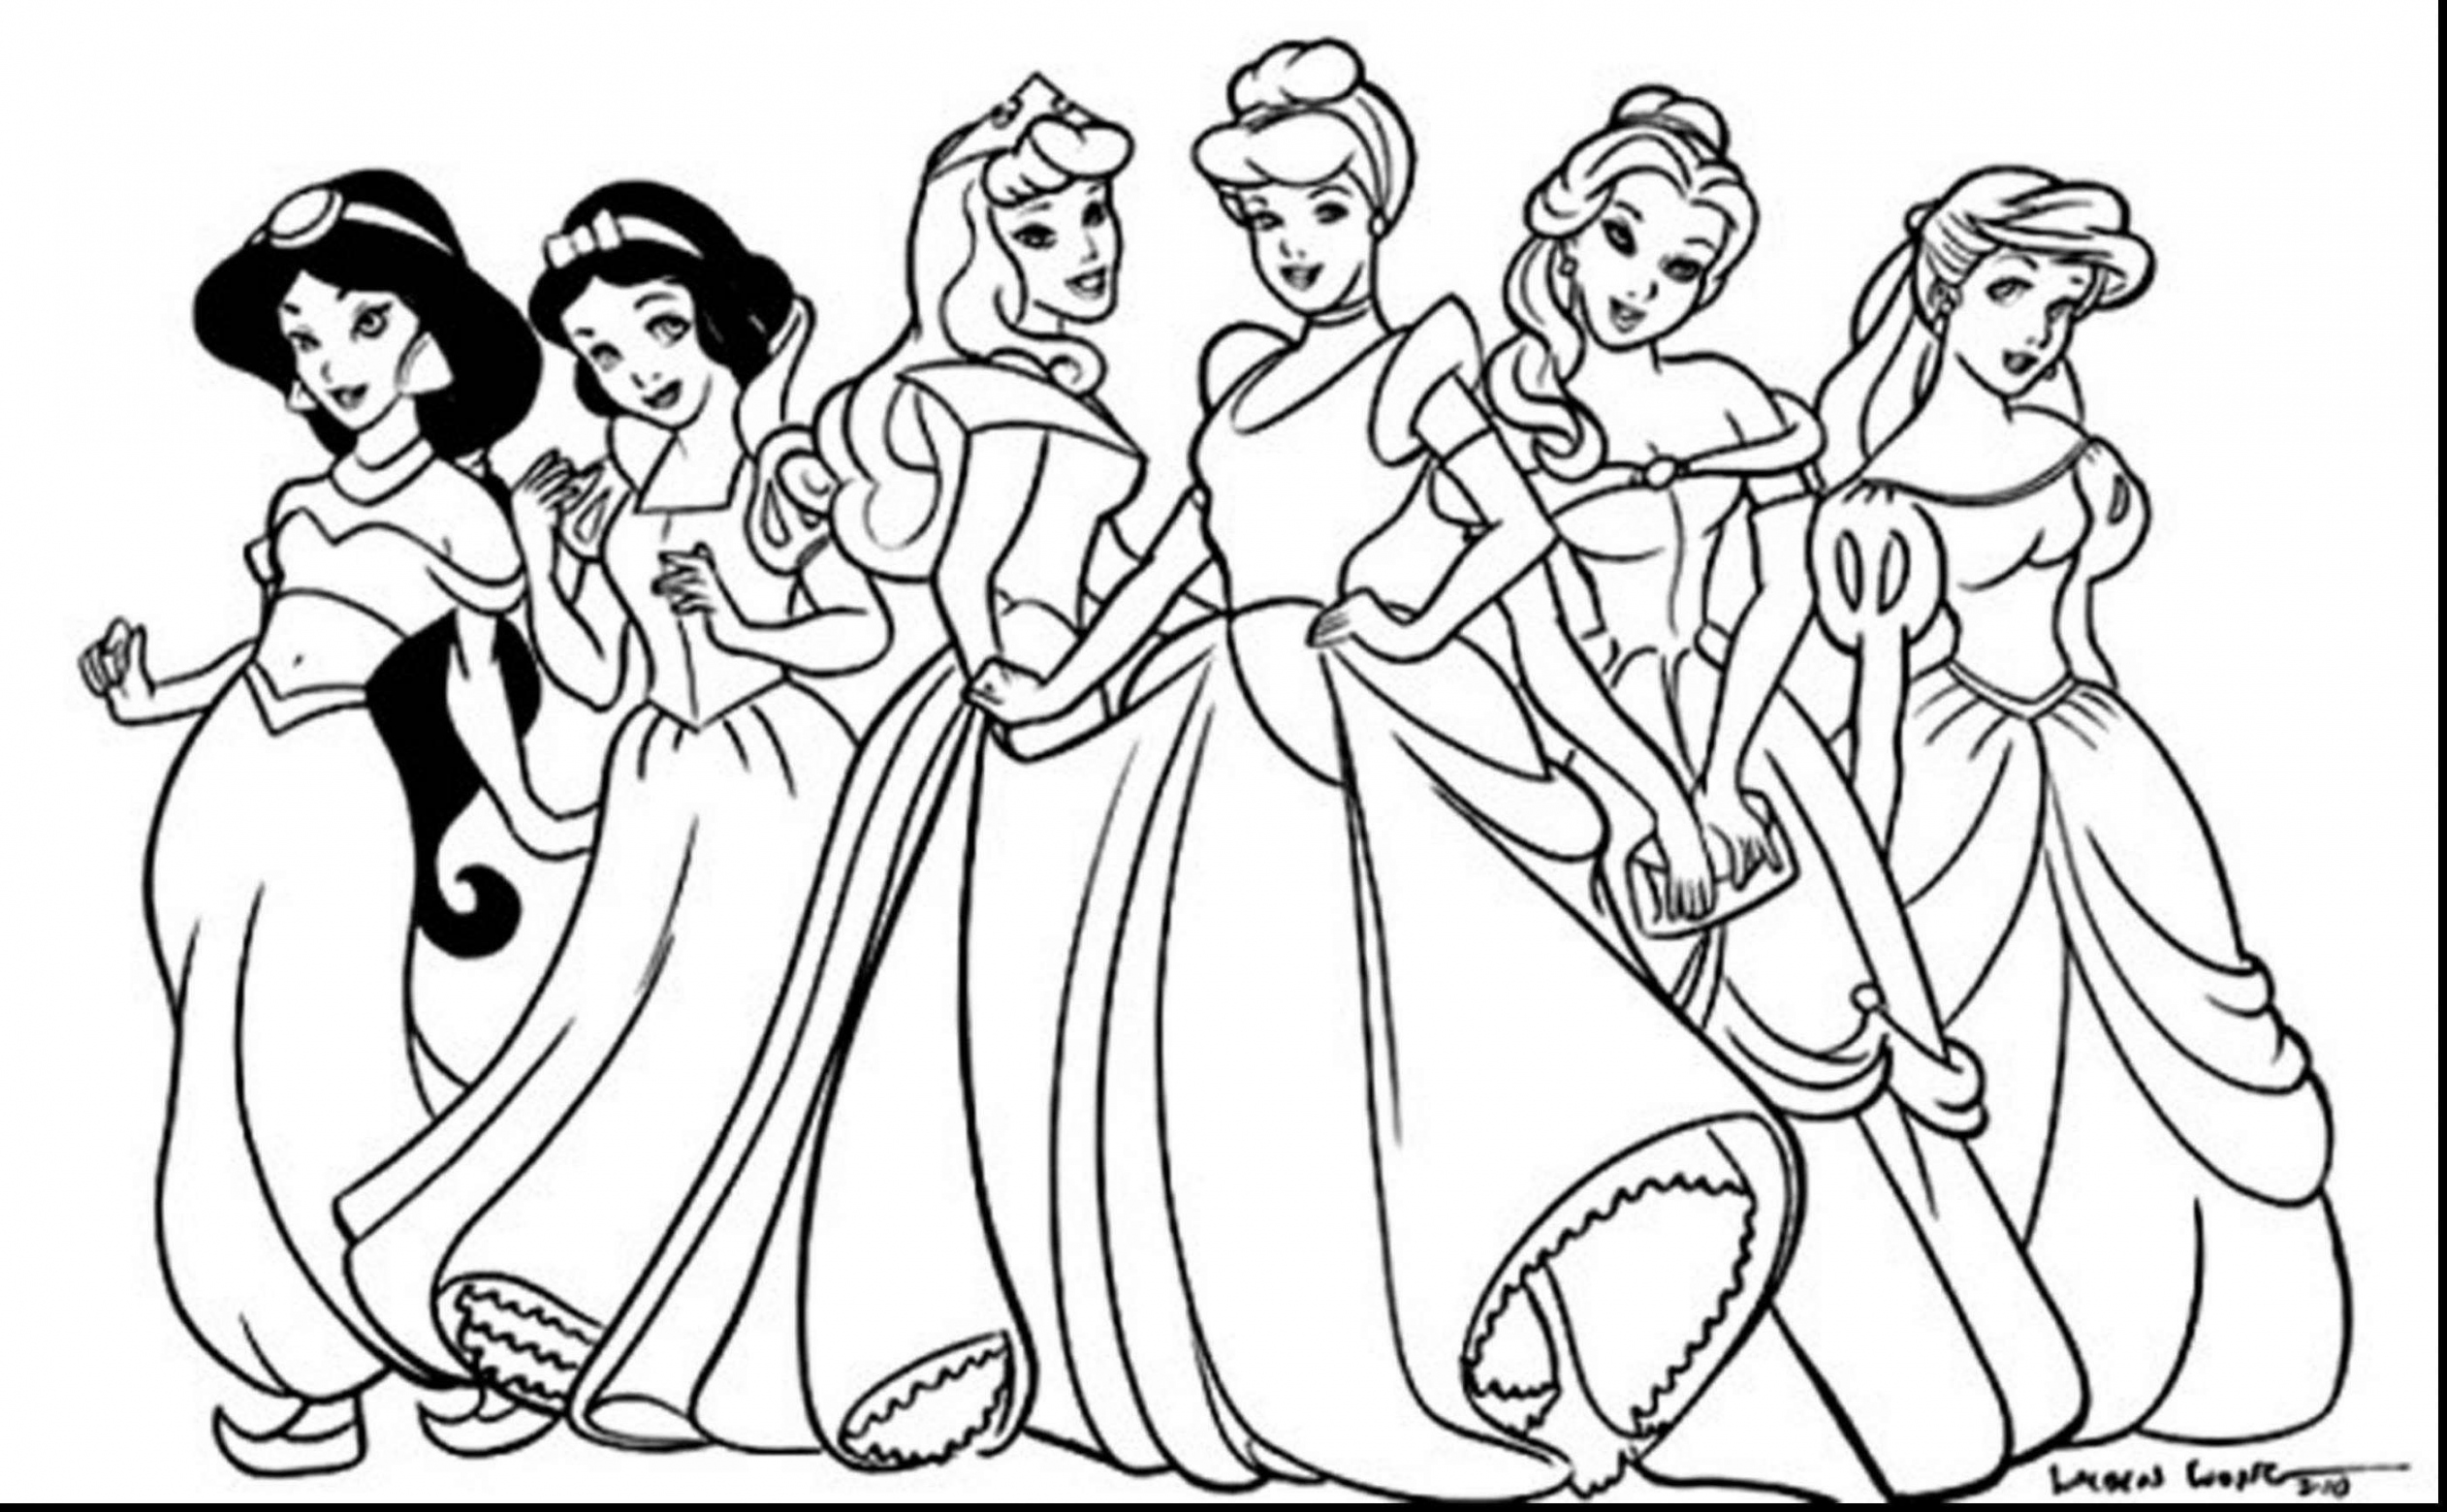 Pin on Princess Coloring Pages - FREE Printables - Free Printable Disney Princess Coloring Pages